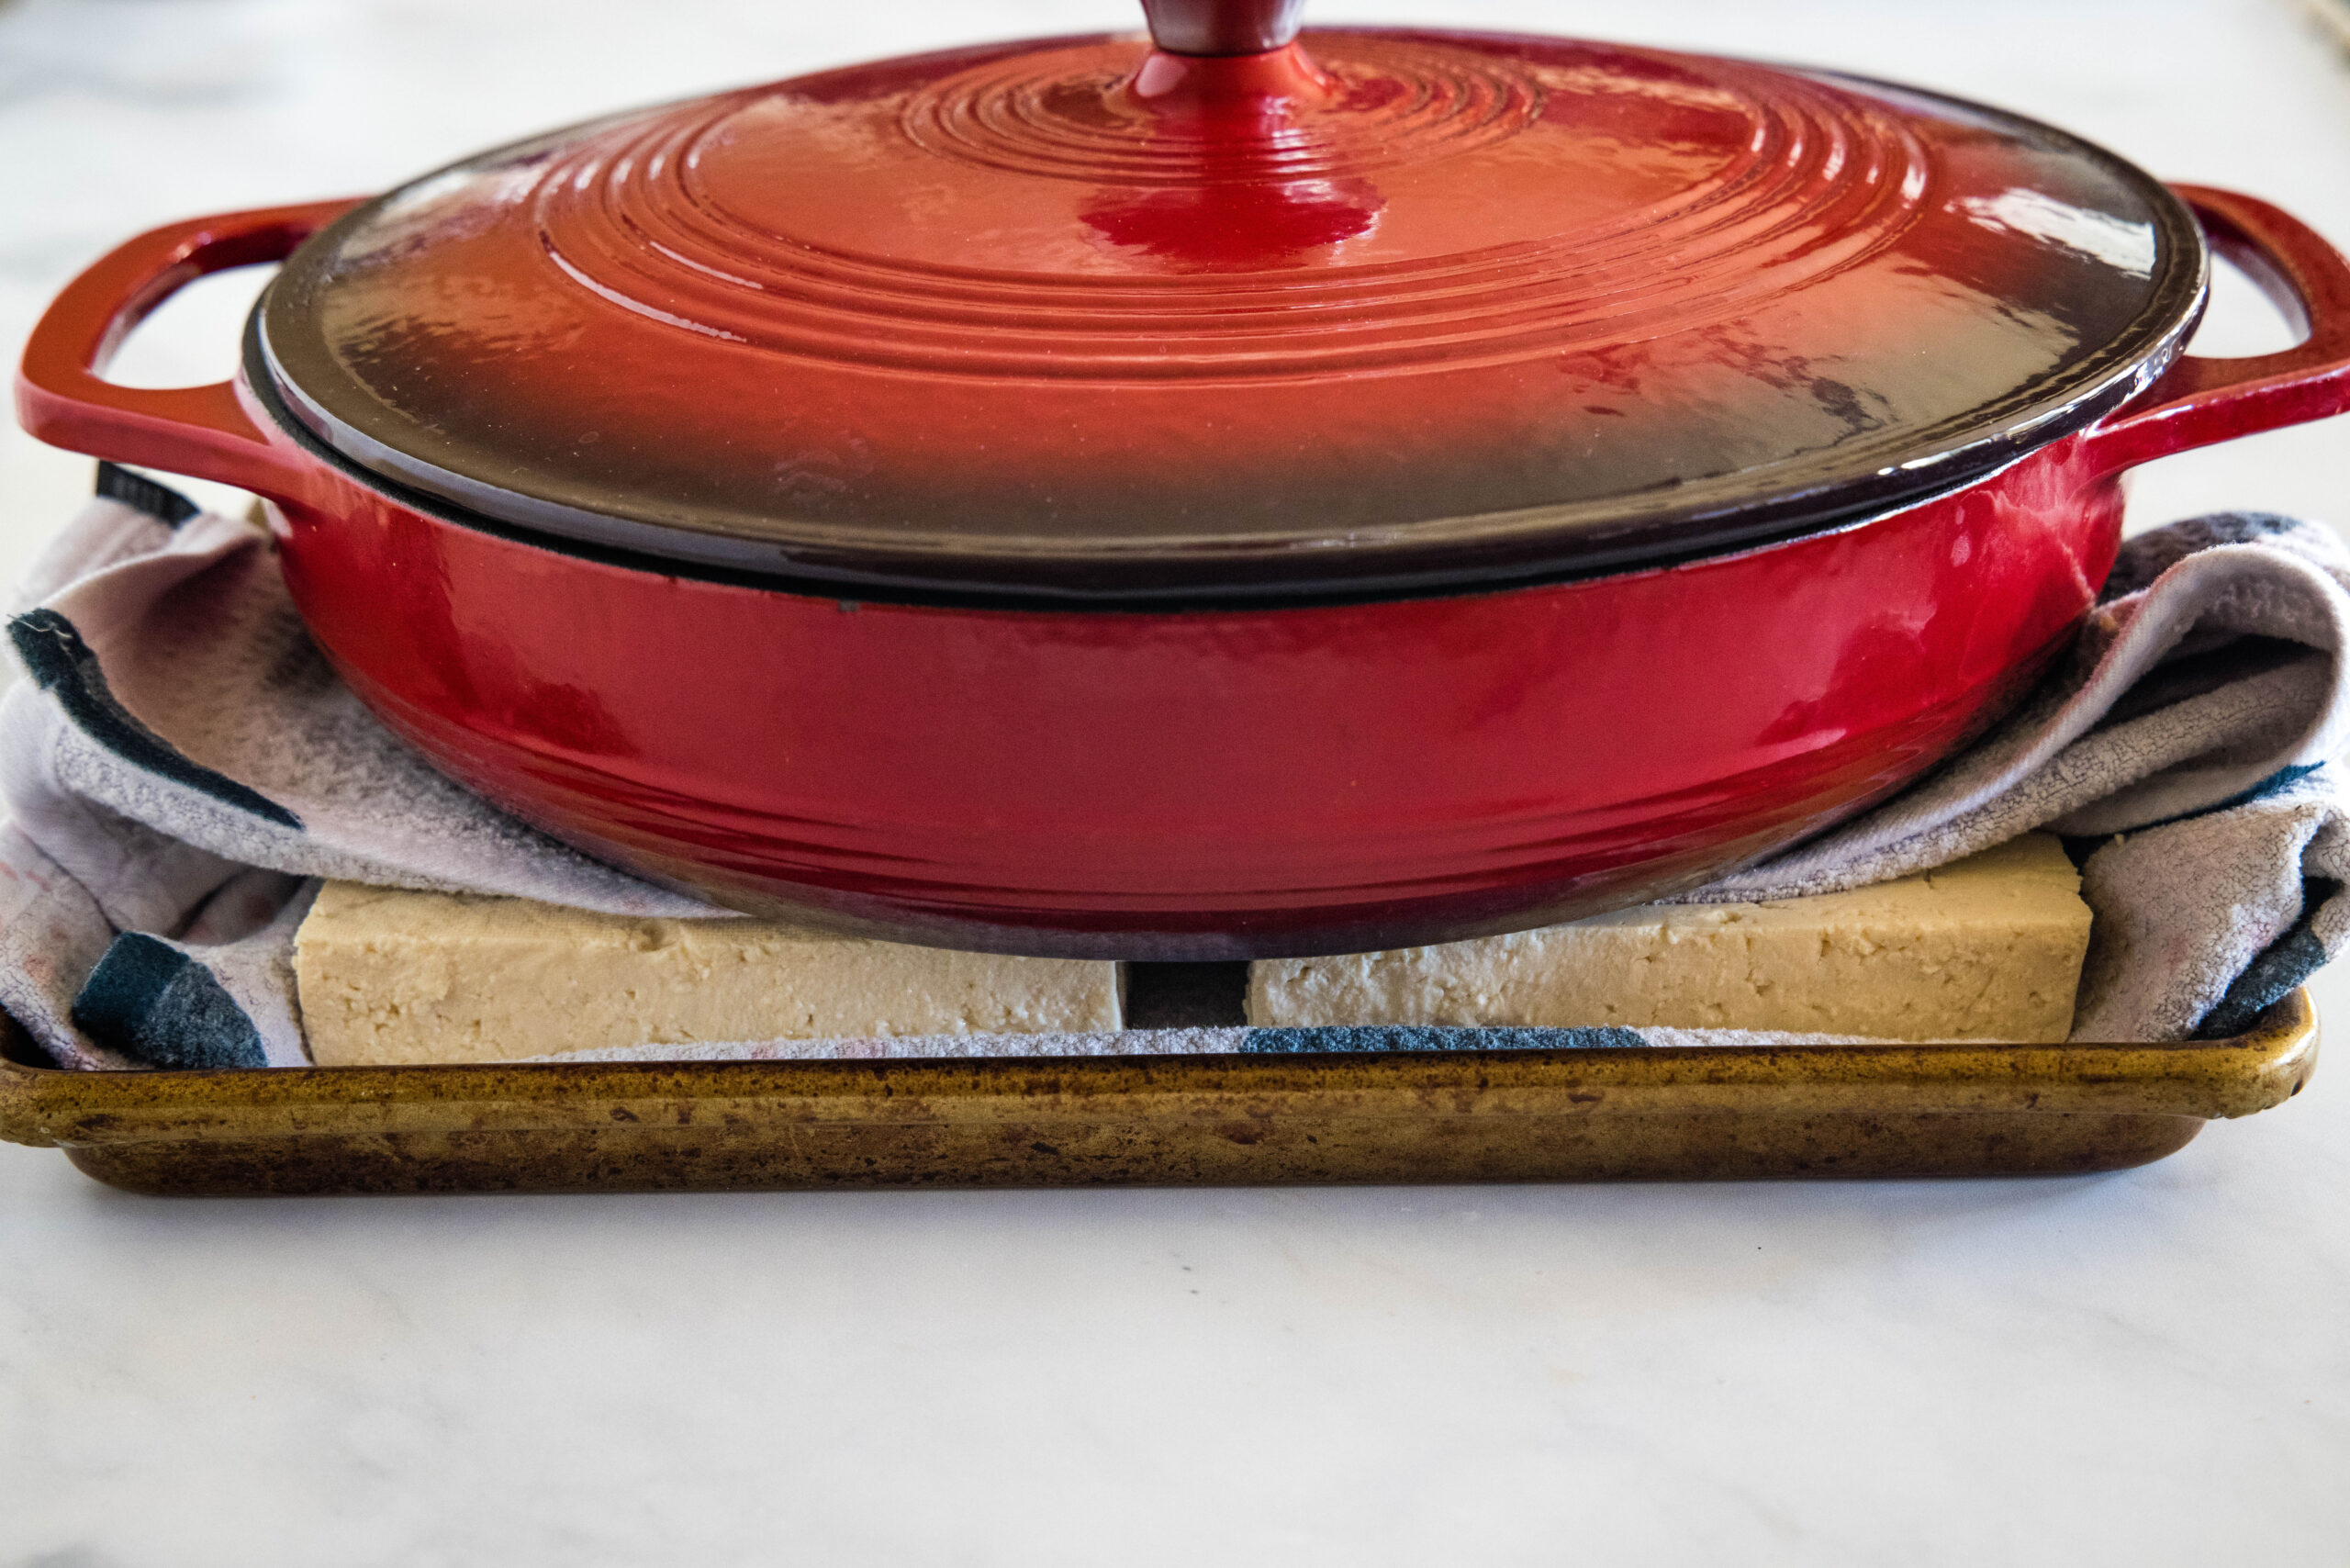 A large red skillet resting on top of tofu wrapped in kitchen towels, to press out the excess liquid.